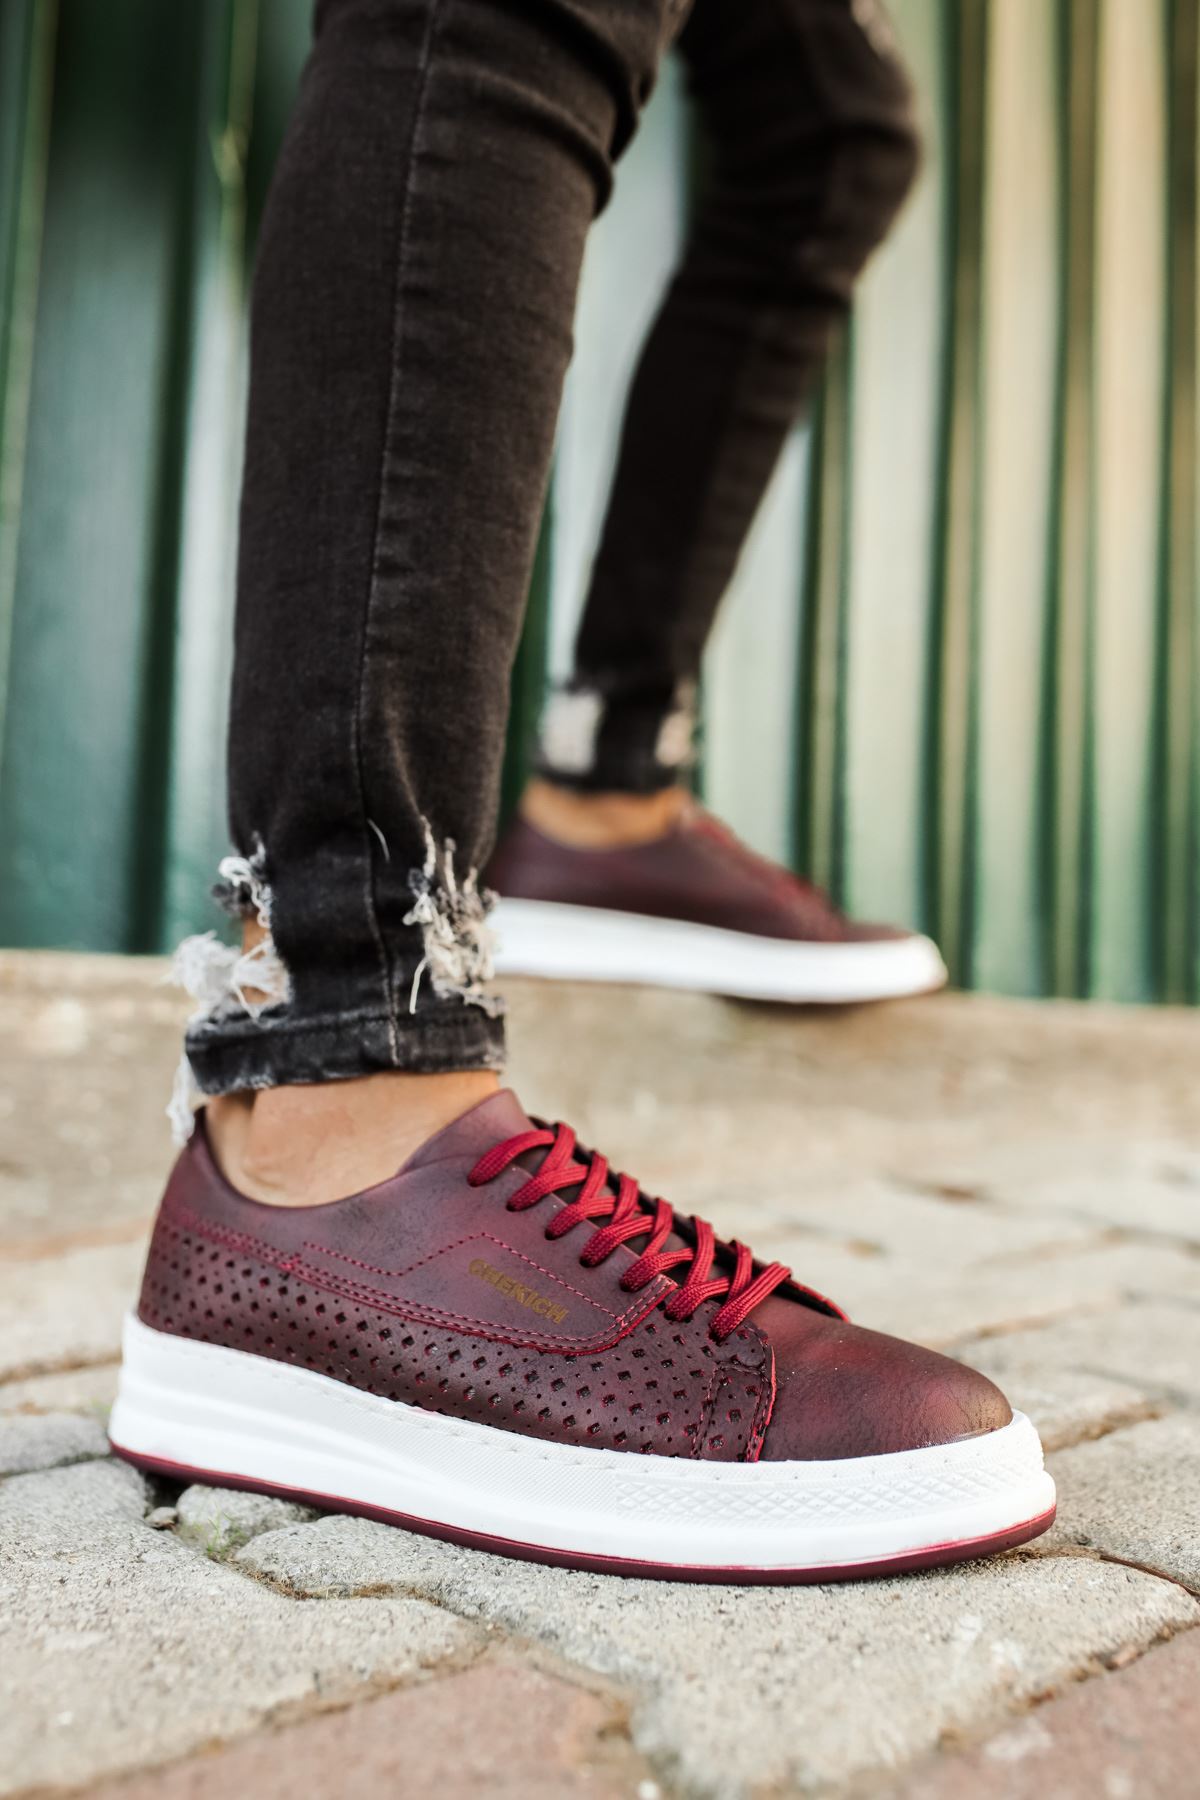 CH043 Men's Unisex Burgundy-White Sole Casual Shoes - STREETMODE™